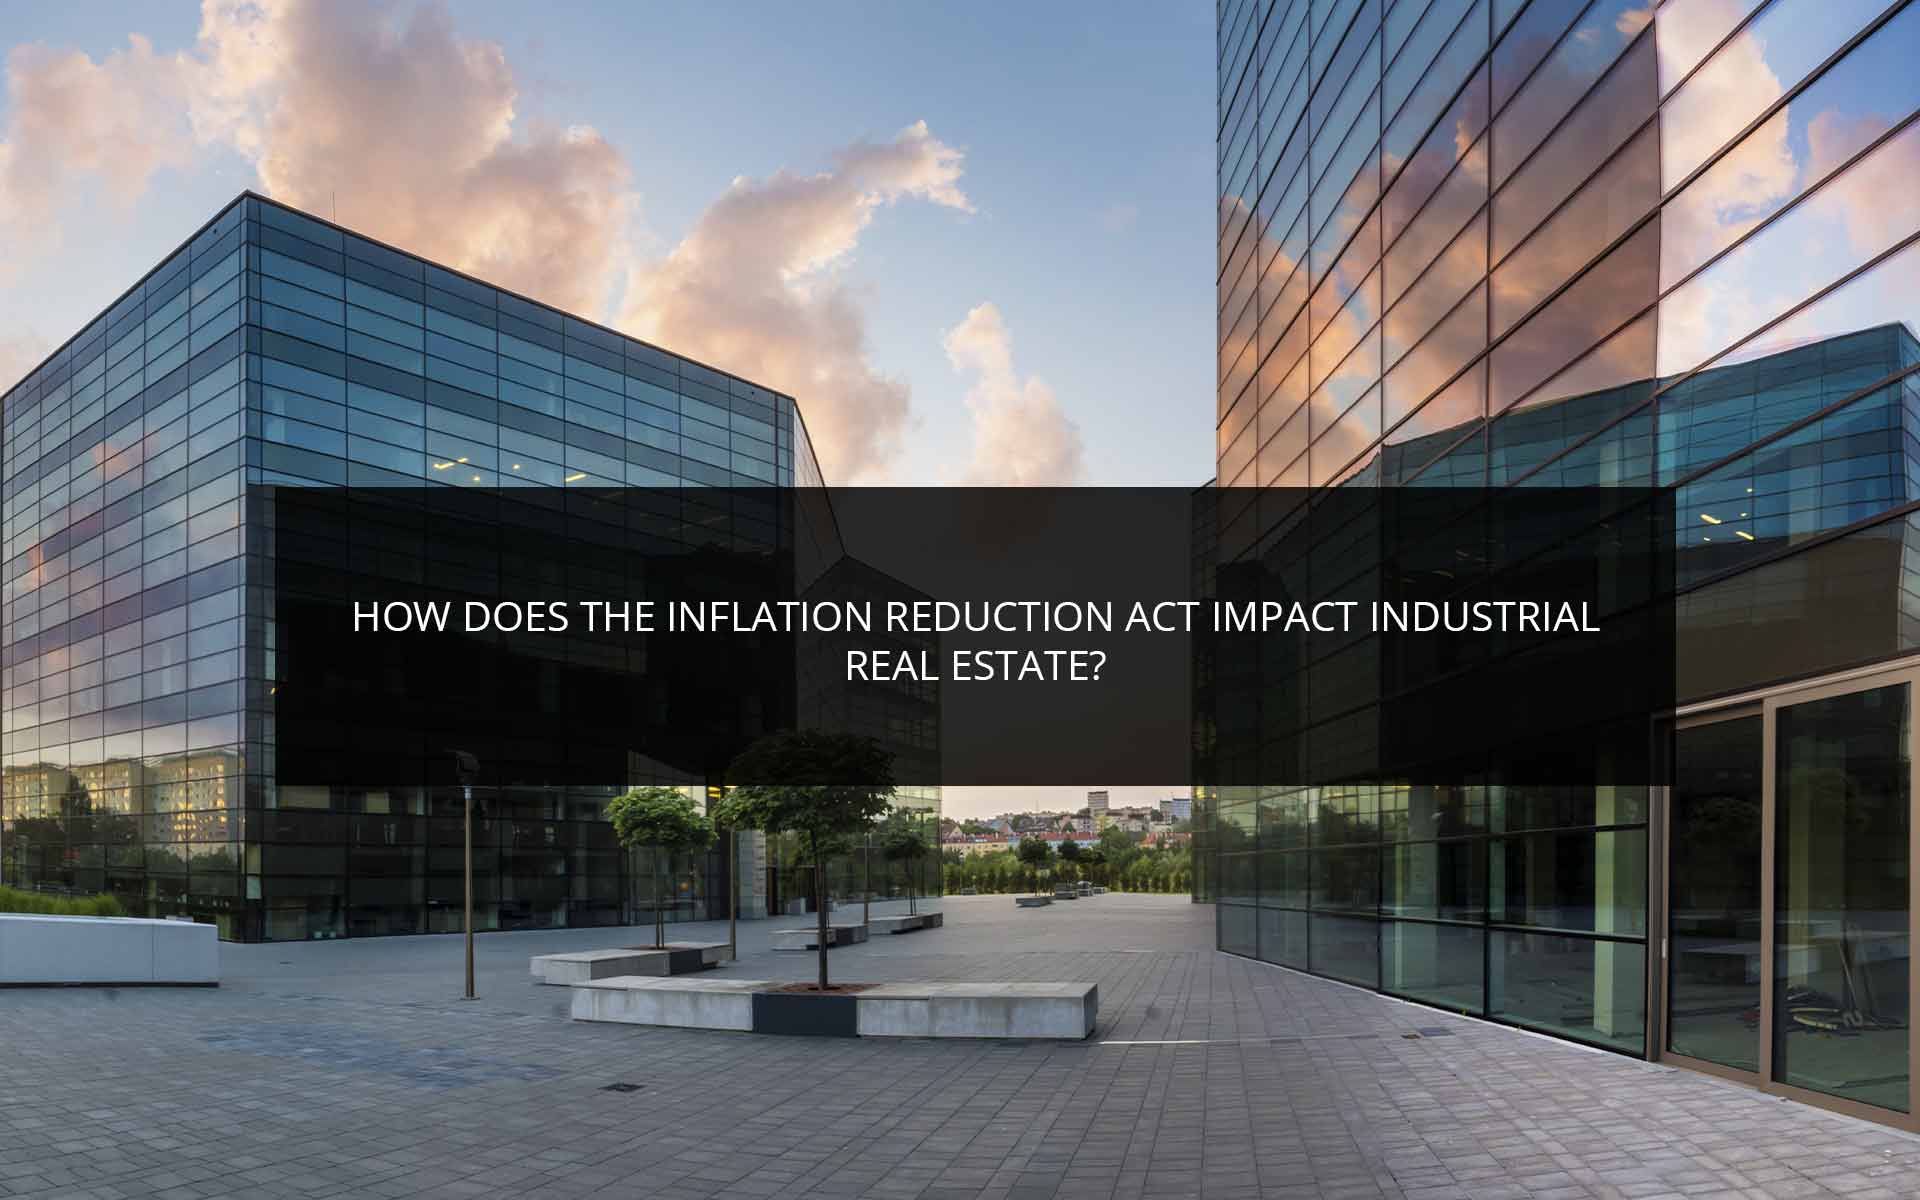 How Does the Inflation Reduction Act Impact Industrial Real Estate?